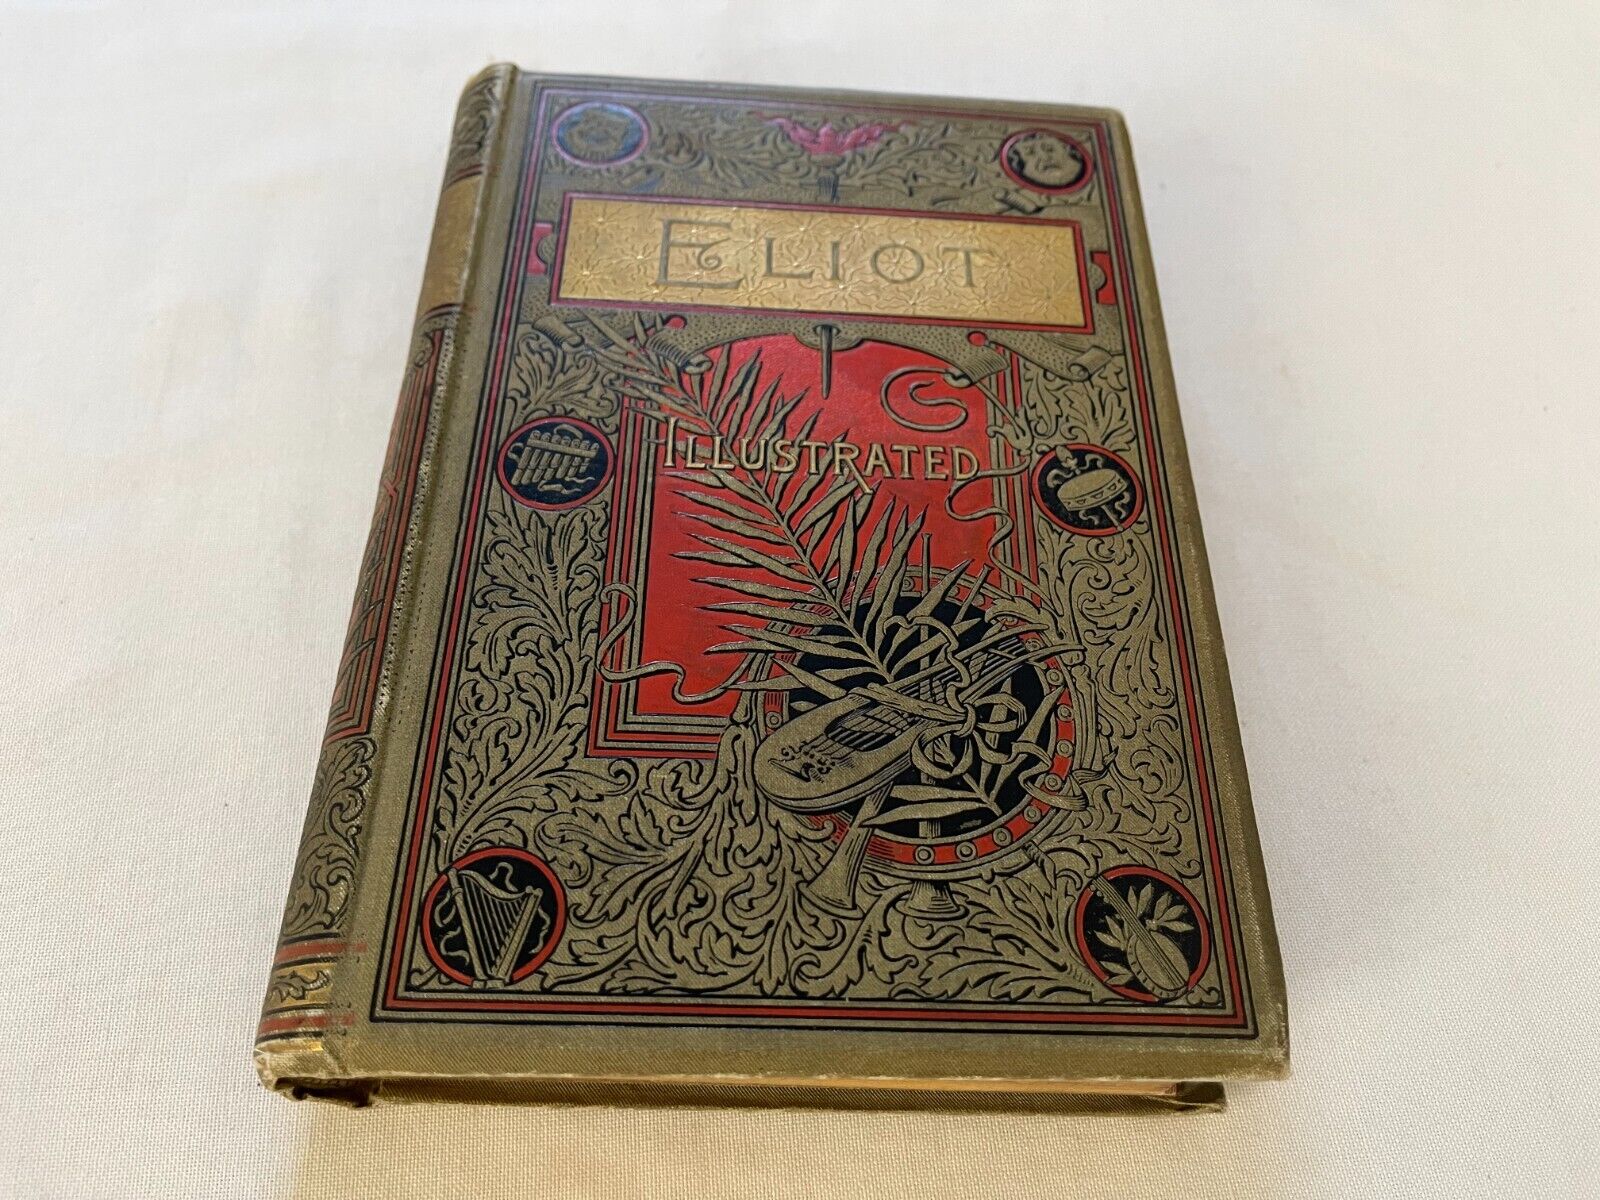 1800s GEORGE ELIOT The Spanish Gypsy THE LEGEND OF JUBAL Illustrated GOLD GILDED